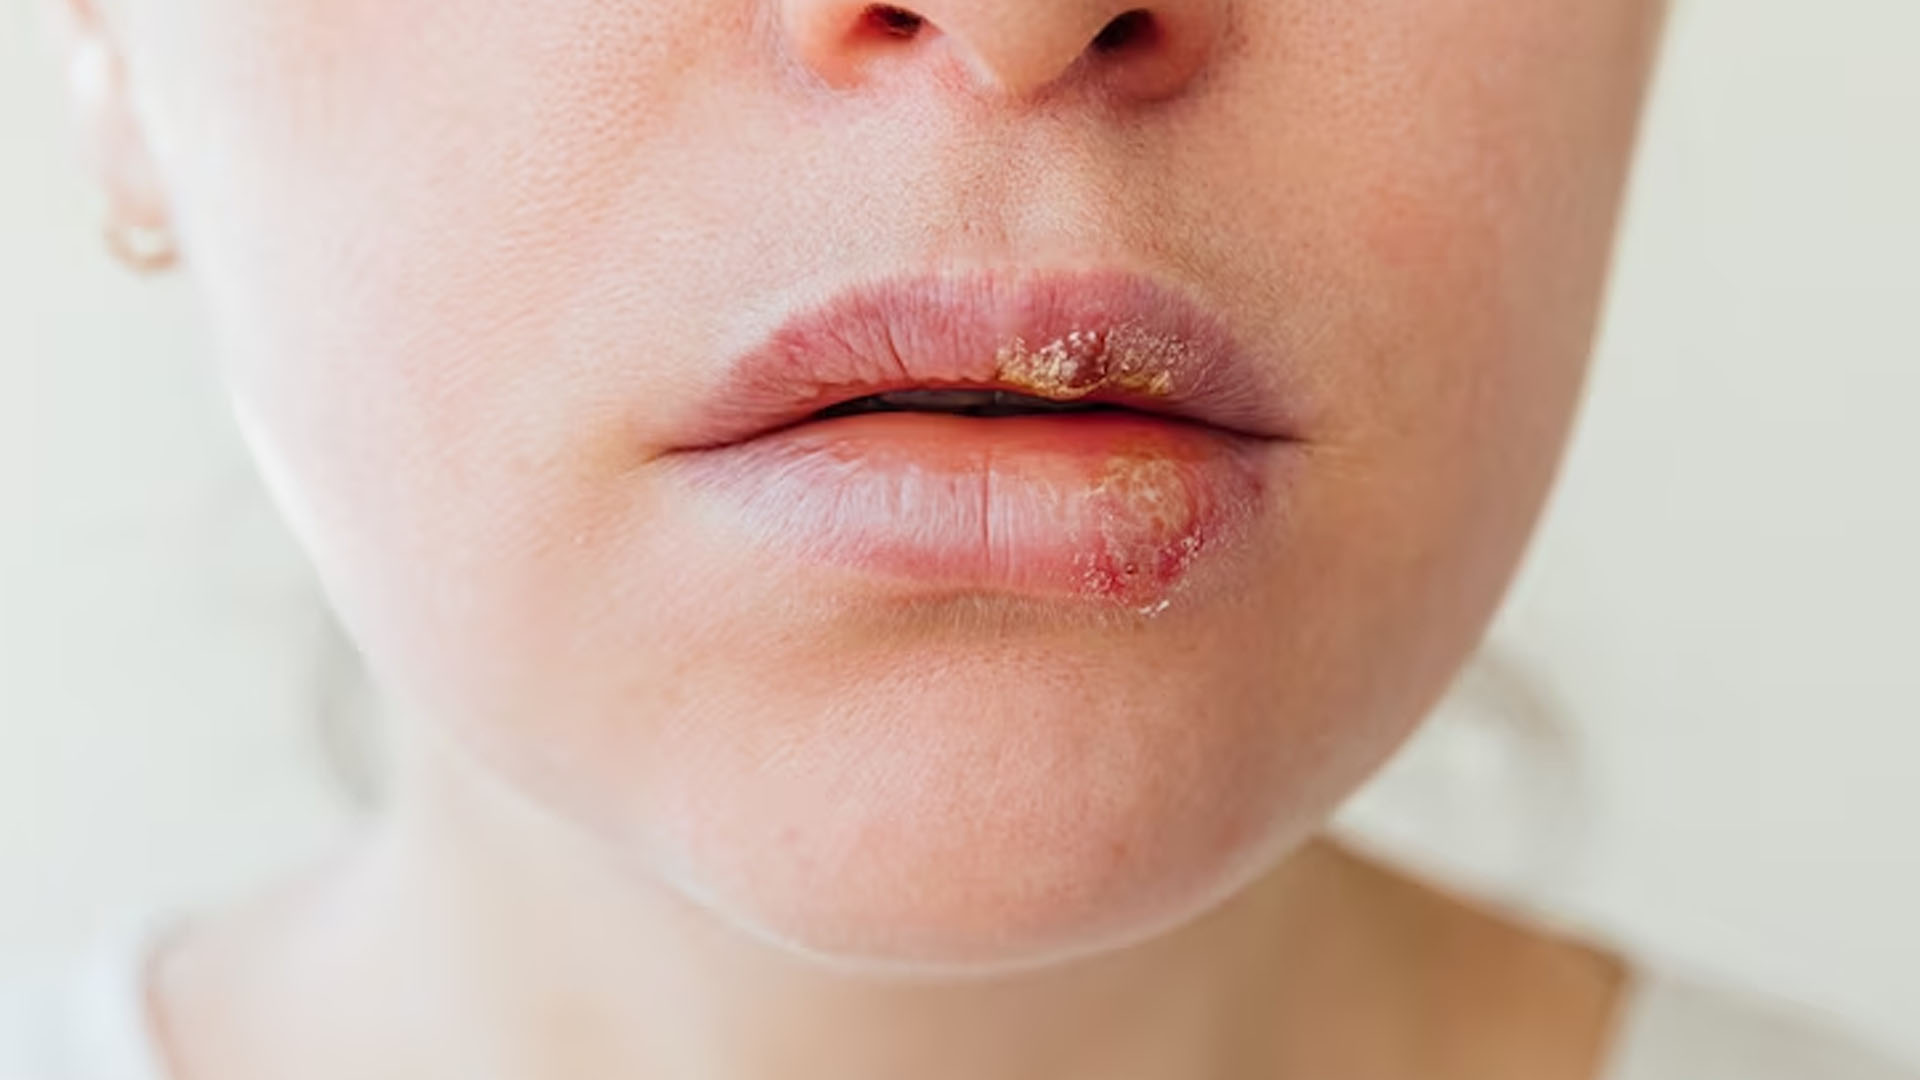 What are the Home Remedies for Dry Lips?